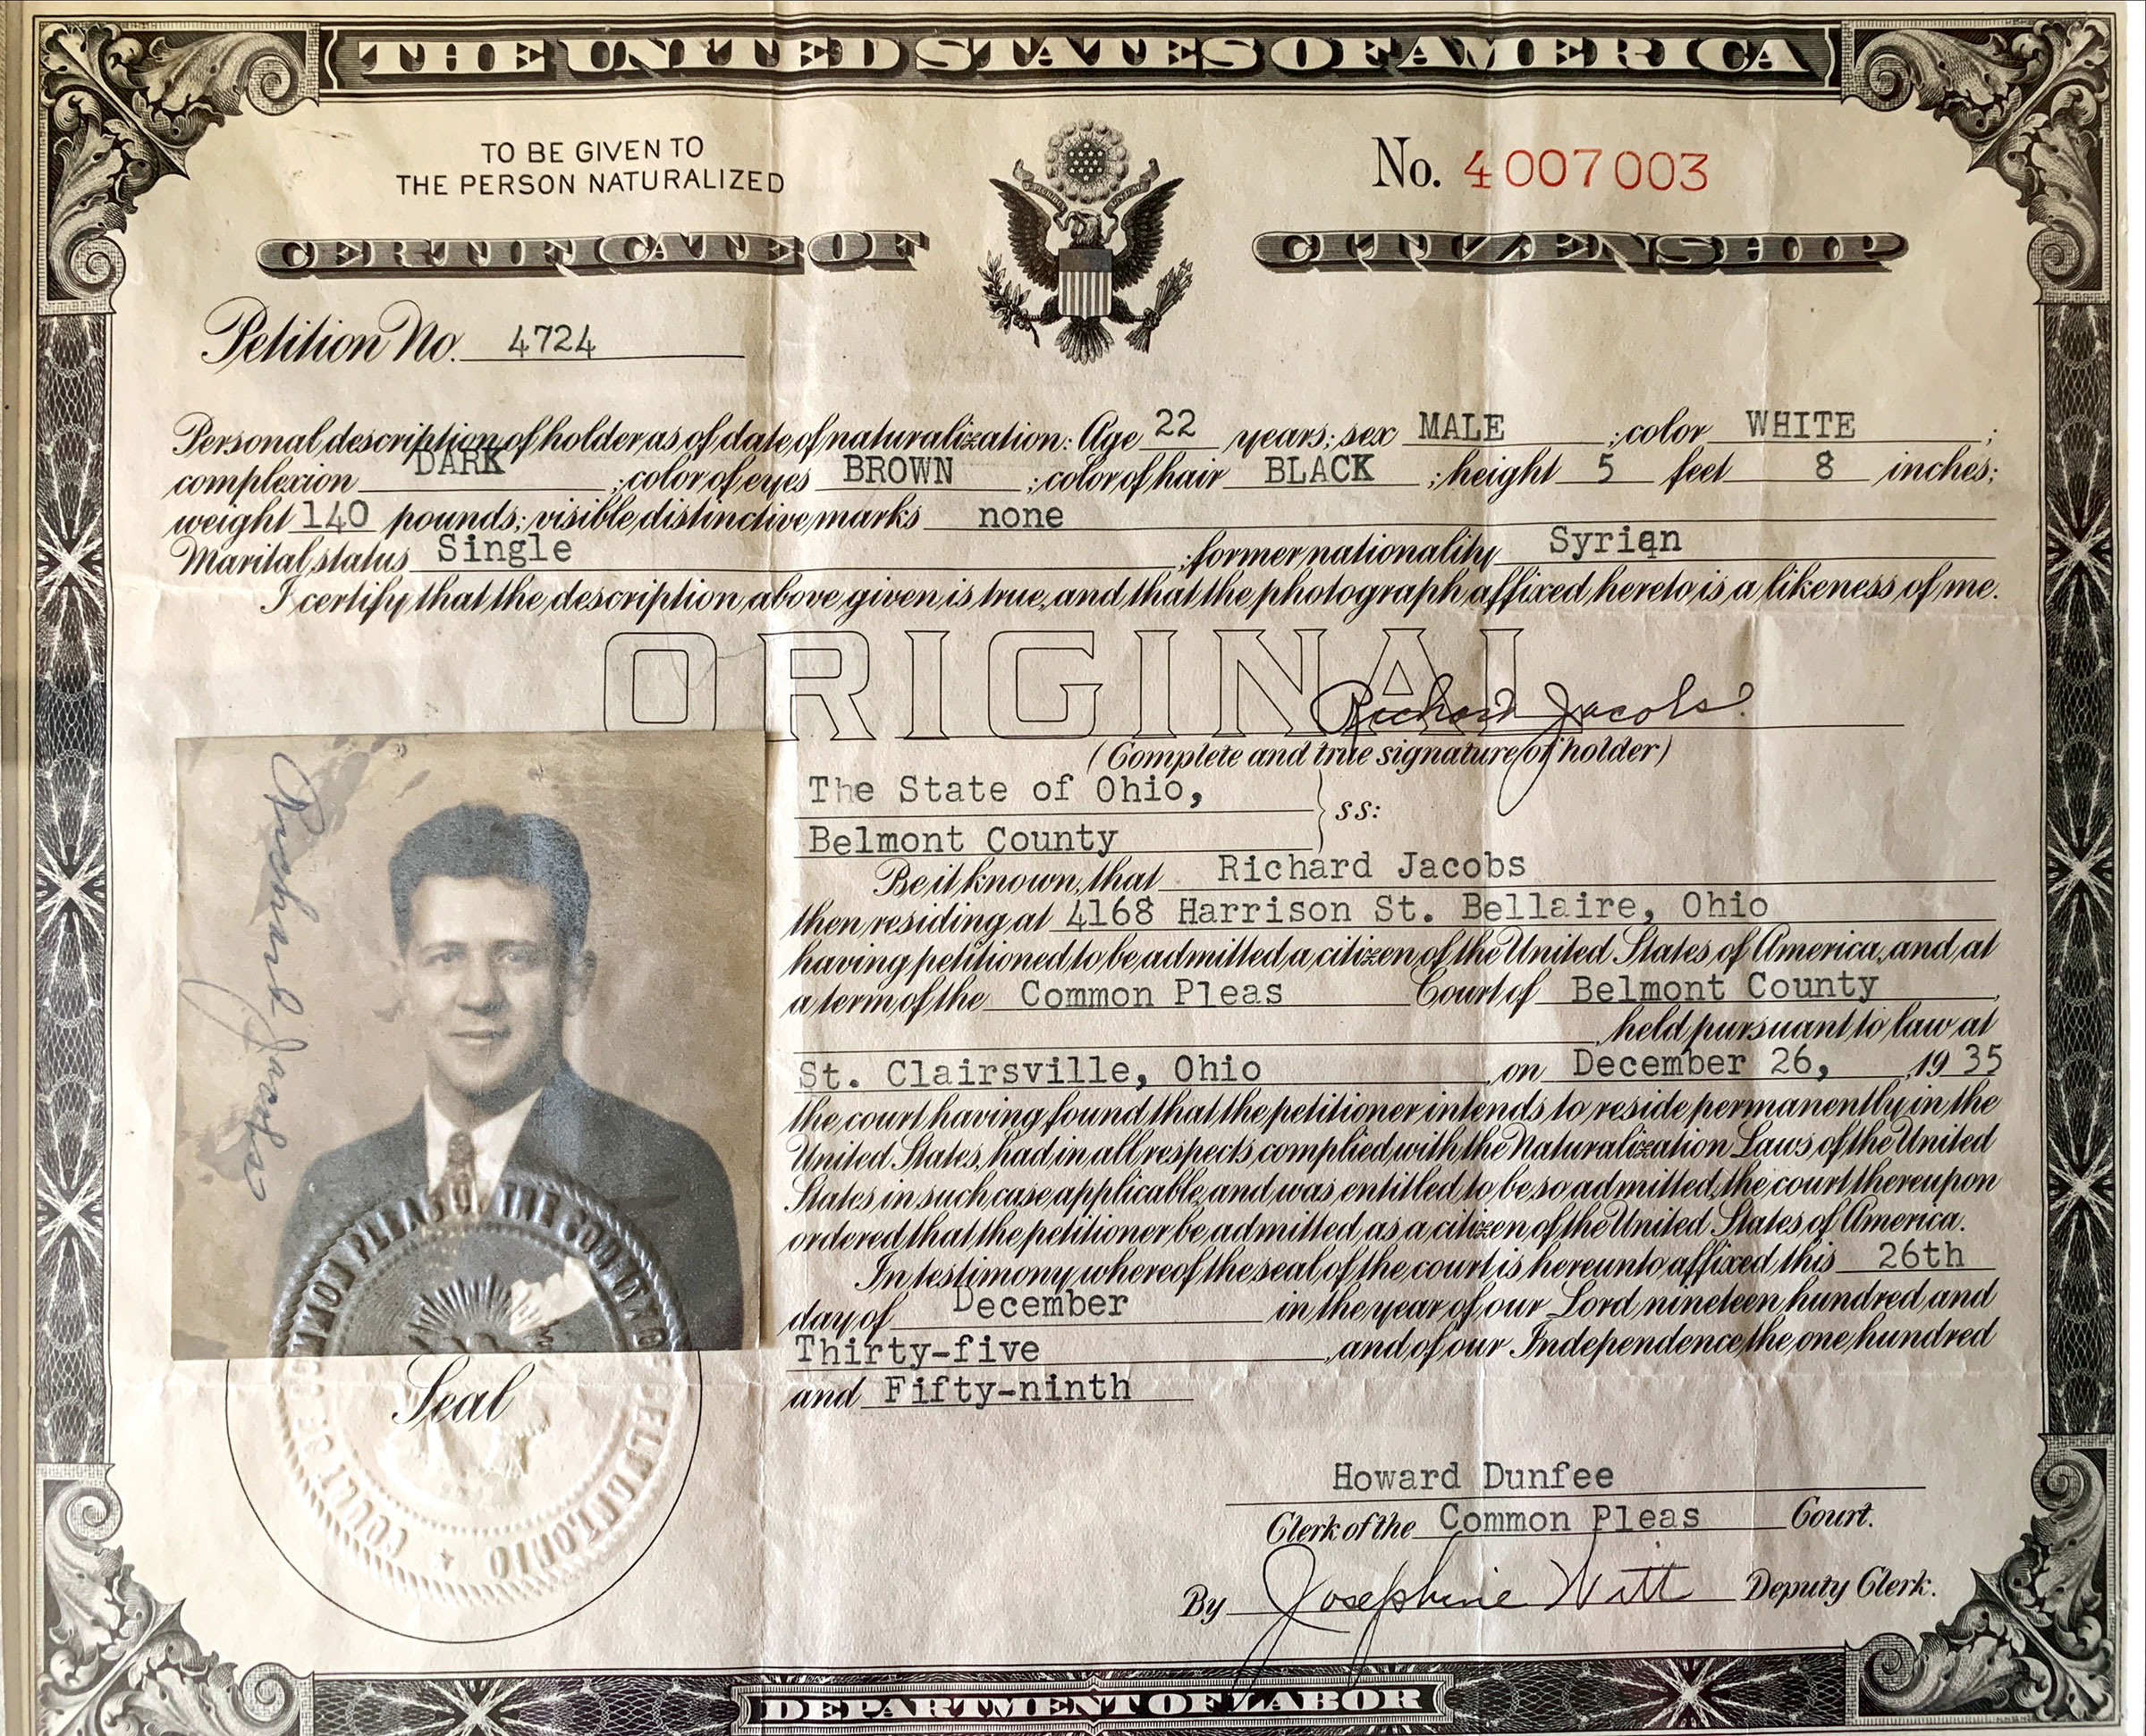 The citizenship papers of Henderson's grandfather